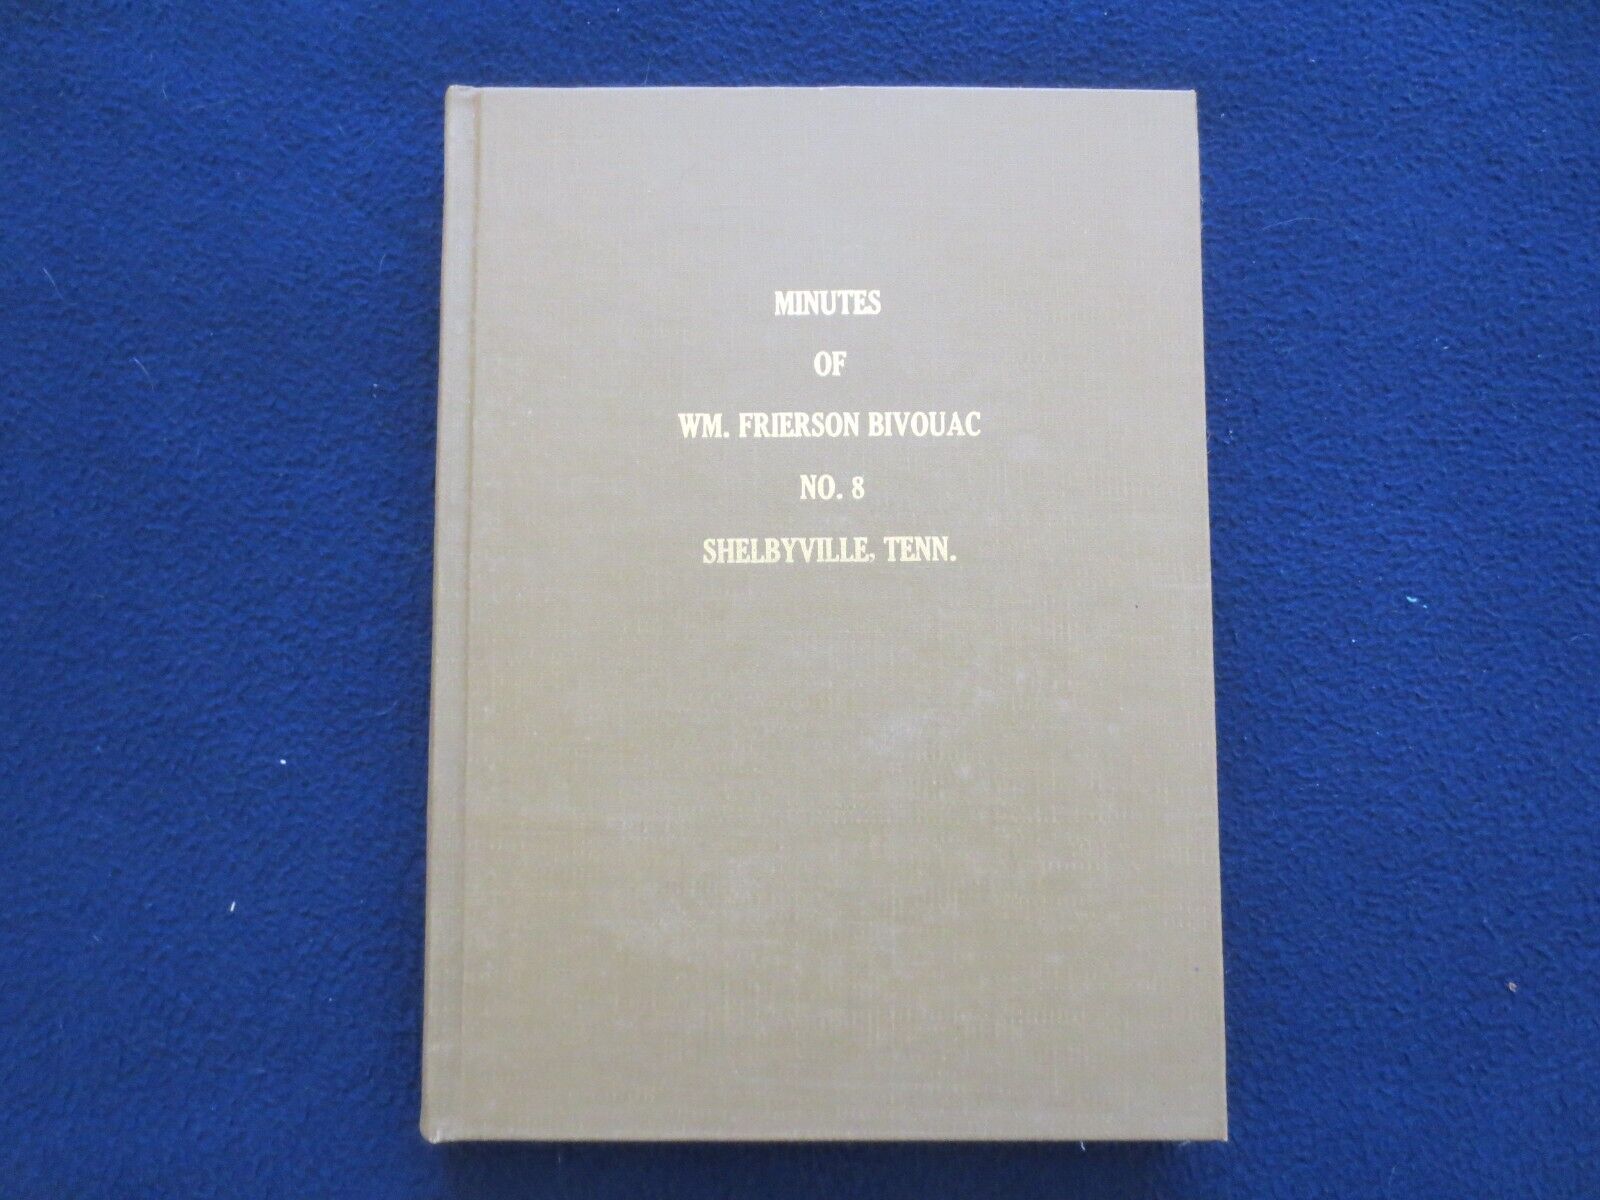 Minutes of W. Frierson Bivouac No. 8 Confederate Veterans, Shelbyville Tennessee